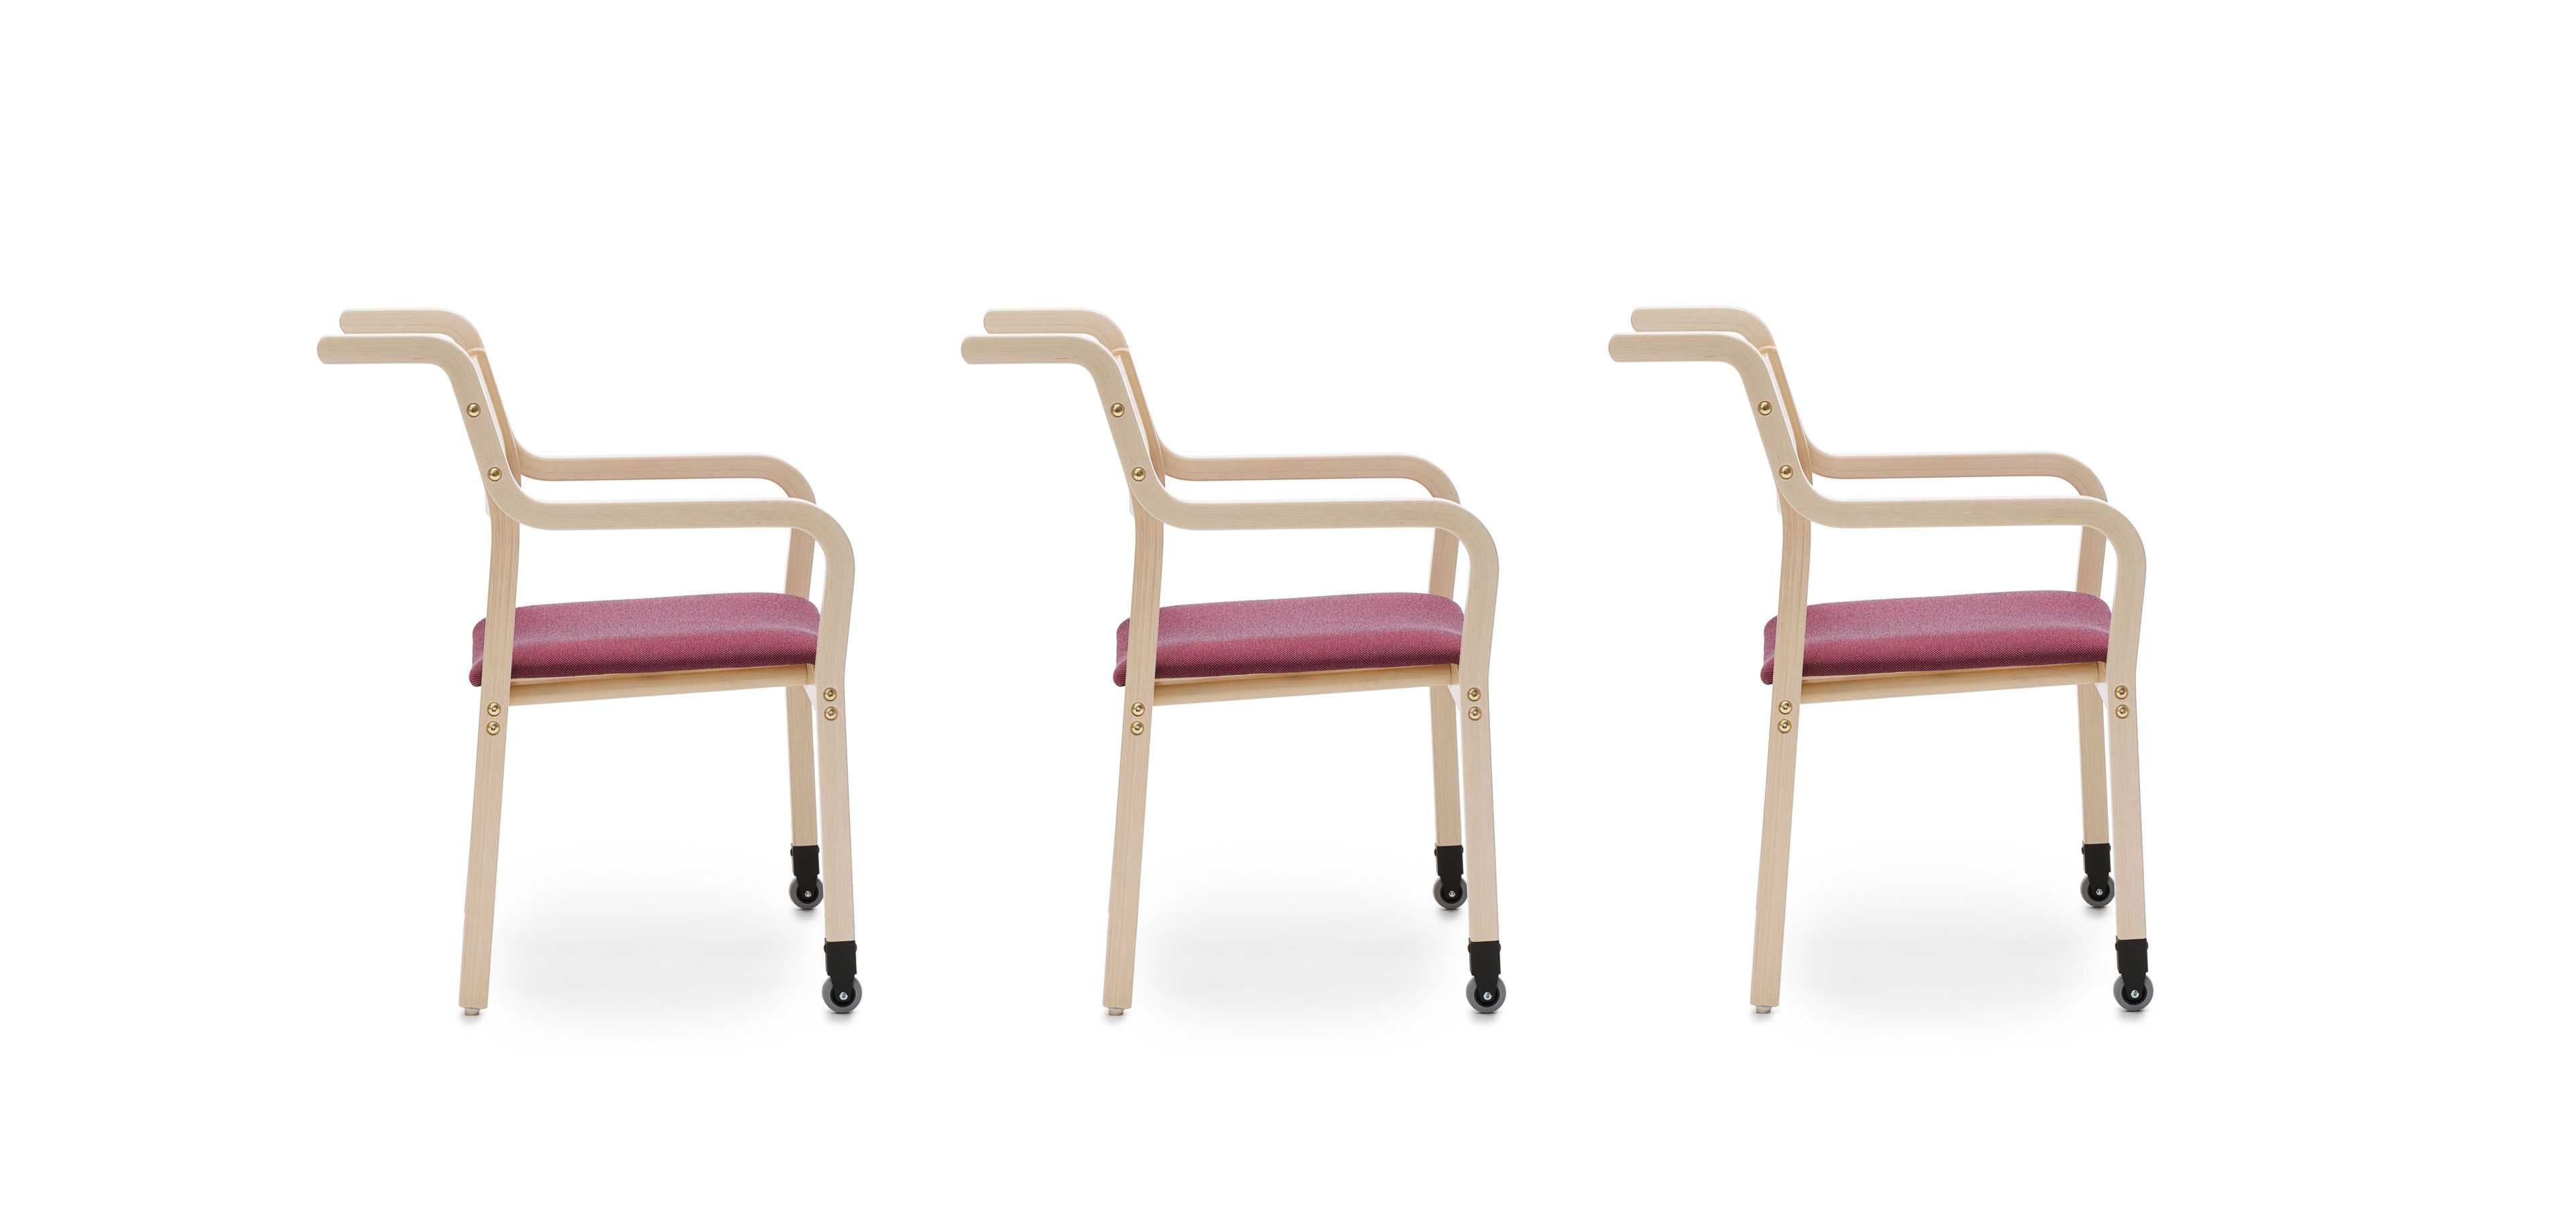 Salus care chair by Martela